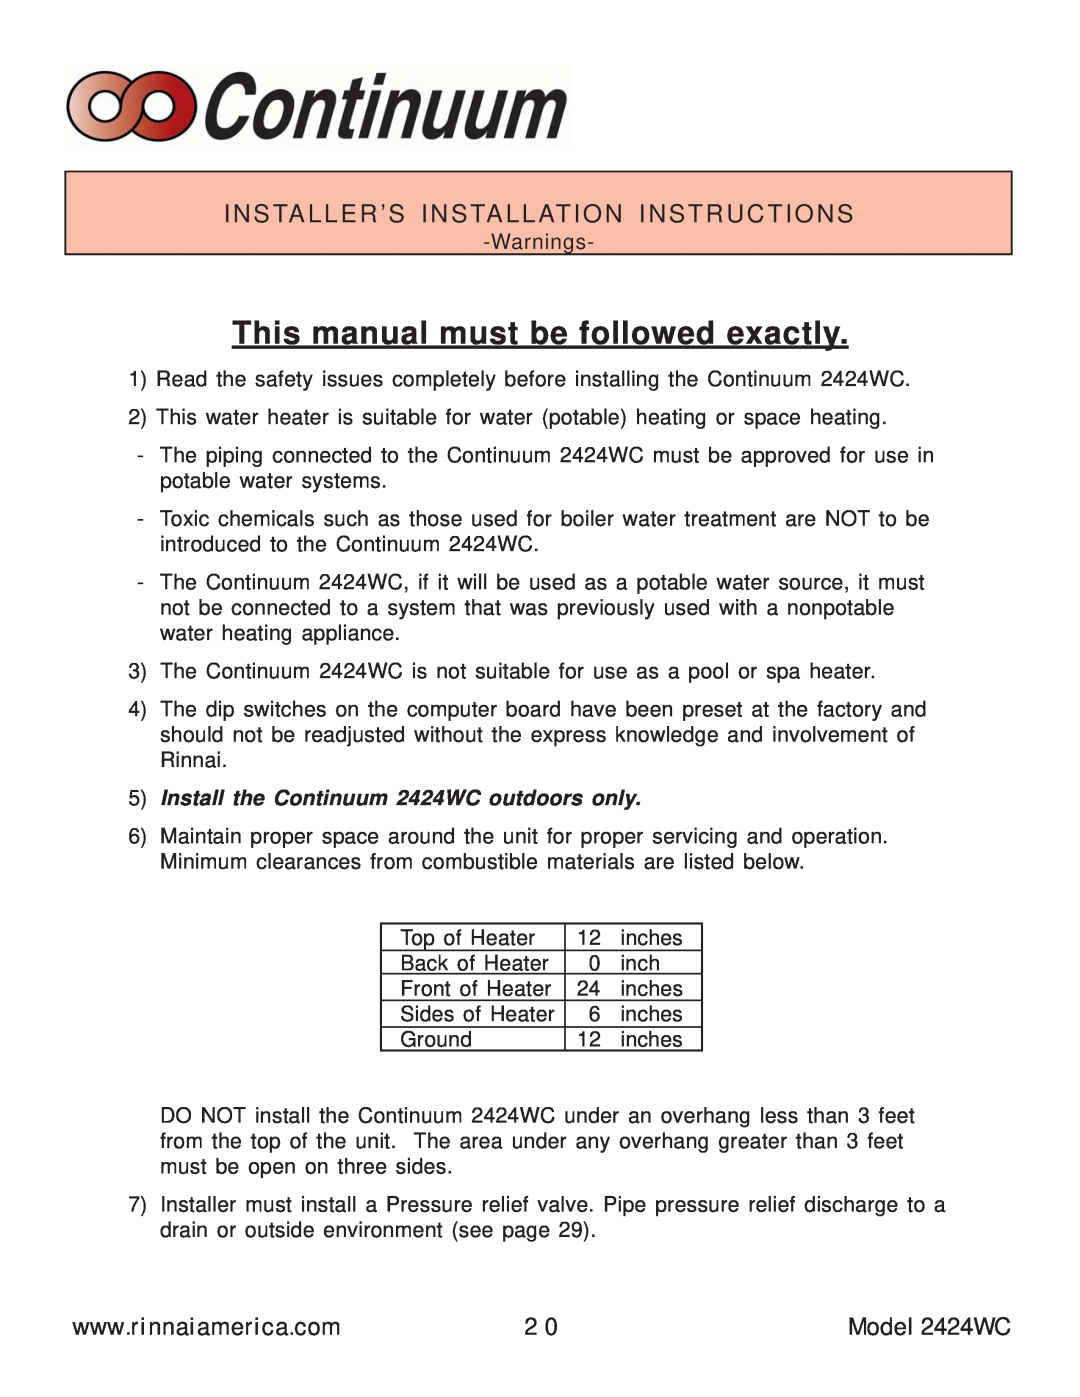 Rinnai This manual must be followed exactly, Installer’S Installation Instructions, Model 2424WC 